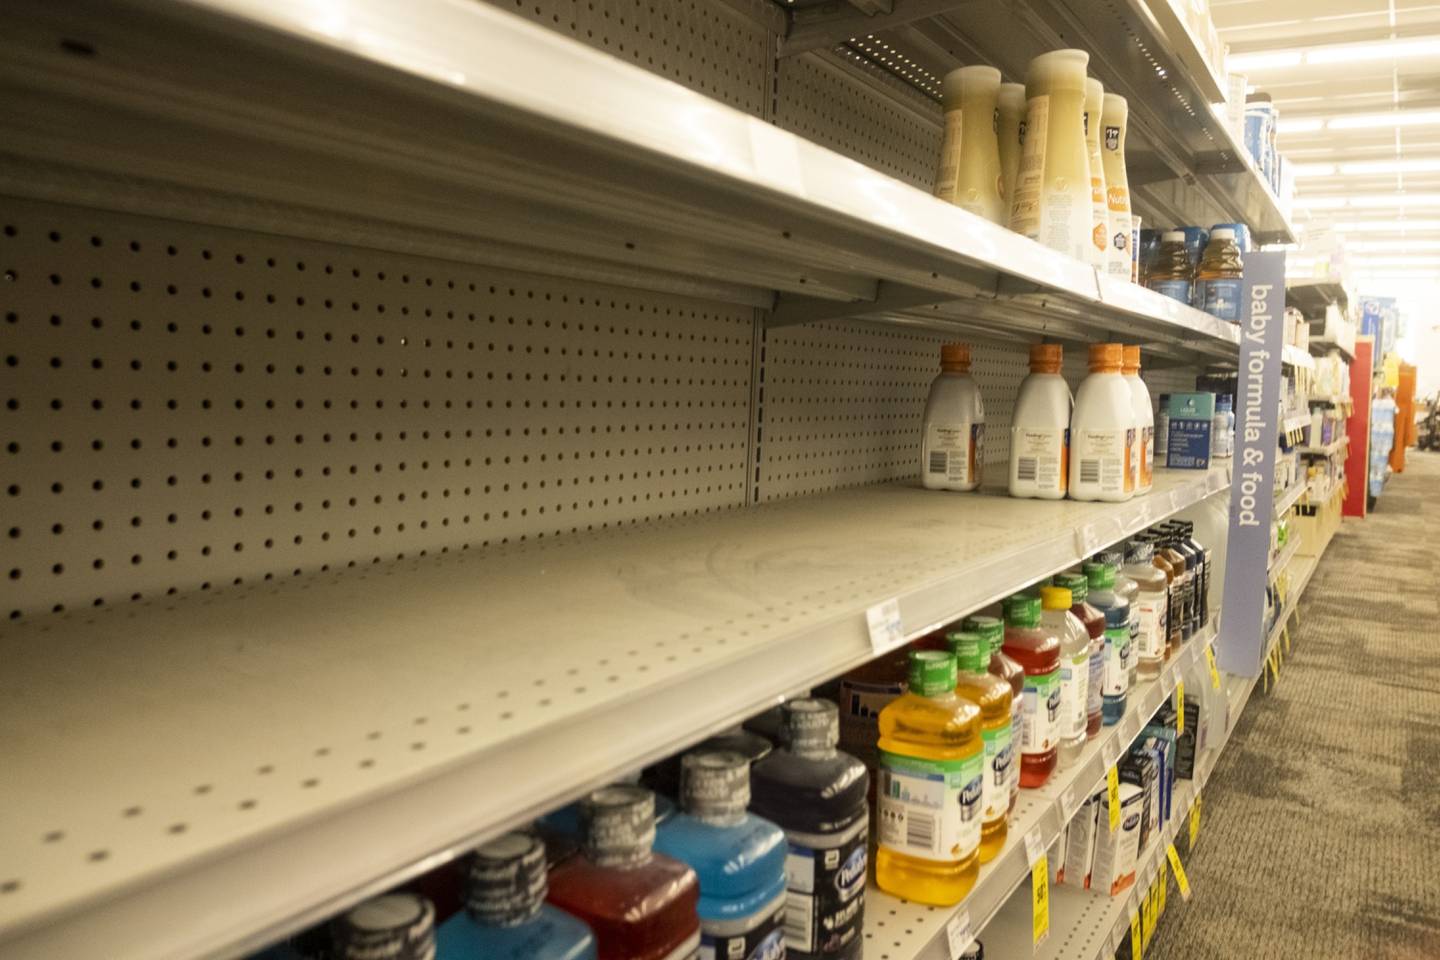 Nearly empty shelves in the baby formula aisle of a grocery store in Detroit, Michigan, US, on Thursday, May 19, 2022. A leading House Democrat plans to grill the Food and Drug Administrations chief about plans to reopen an Abbott Laboratories infant formula plant without first addressing a whistle-blowers allegations.